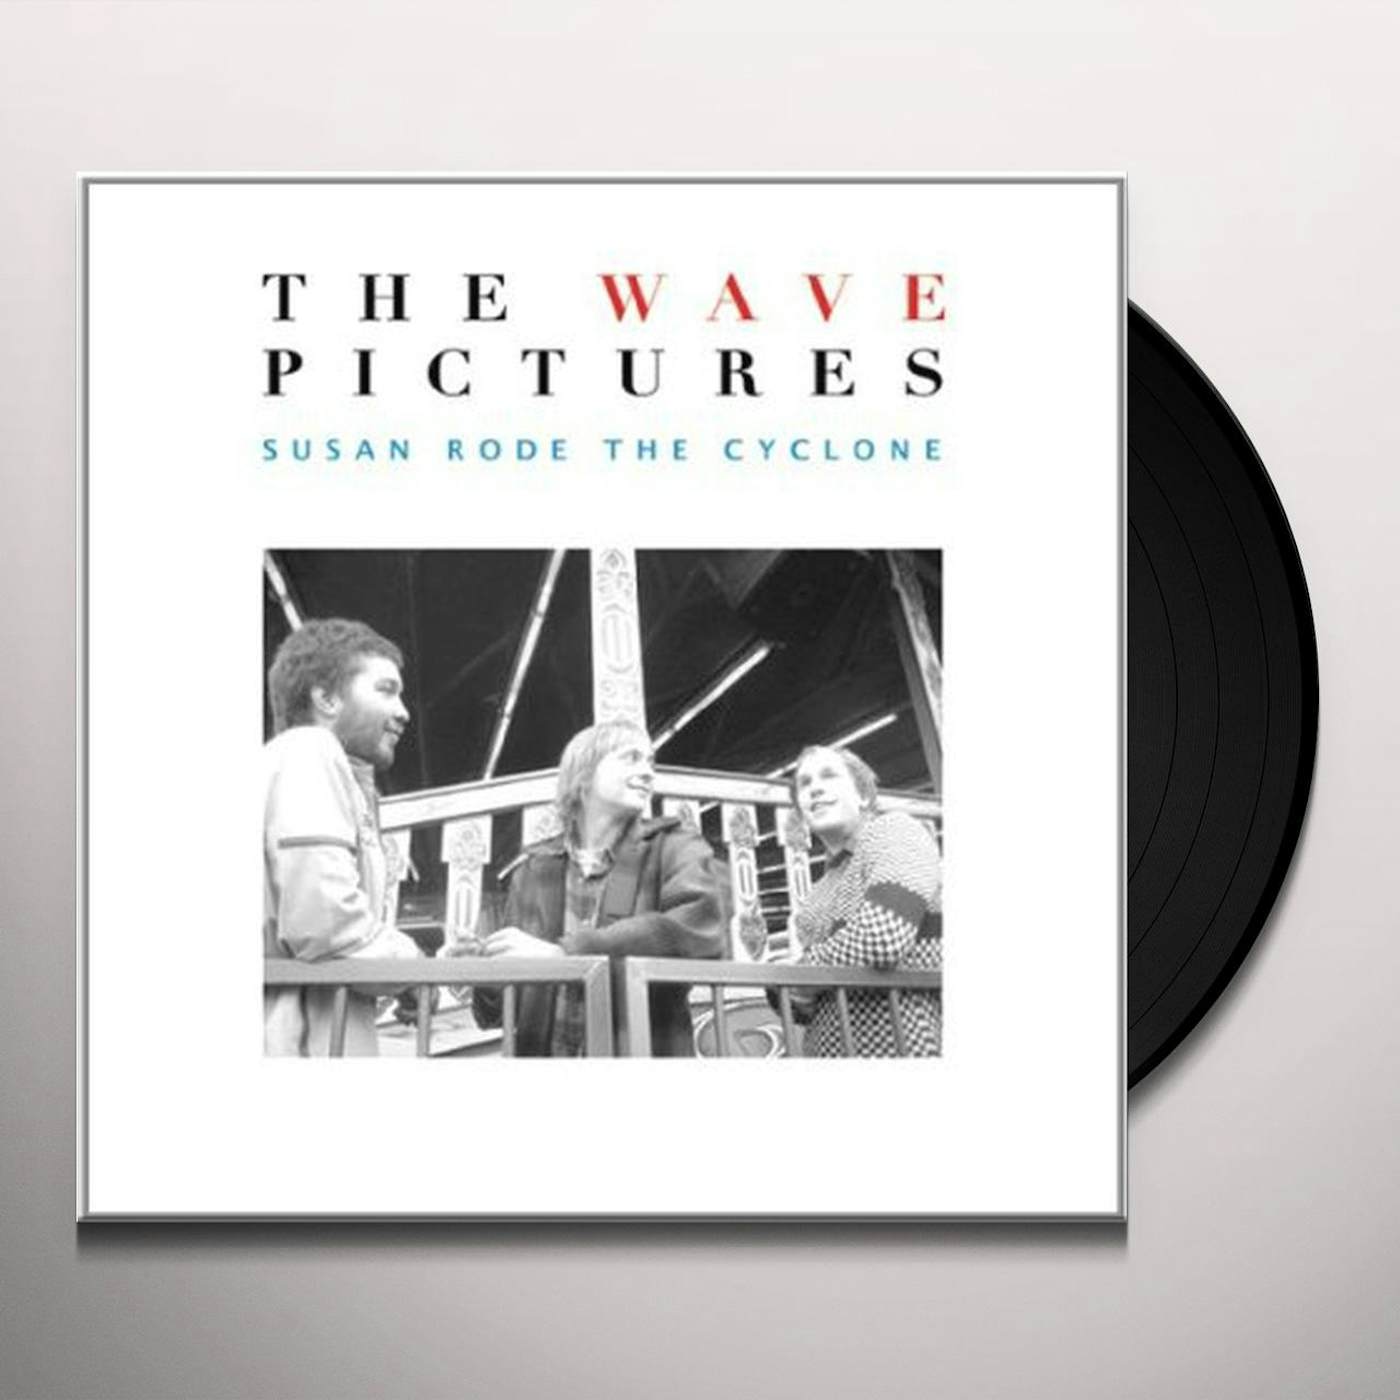 The Wave Pictures Susan Rode the Cyclone Vinyl Record